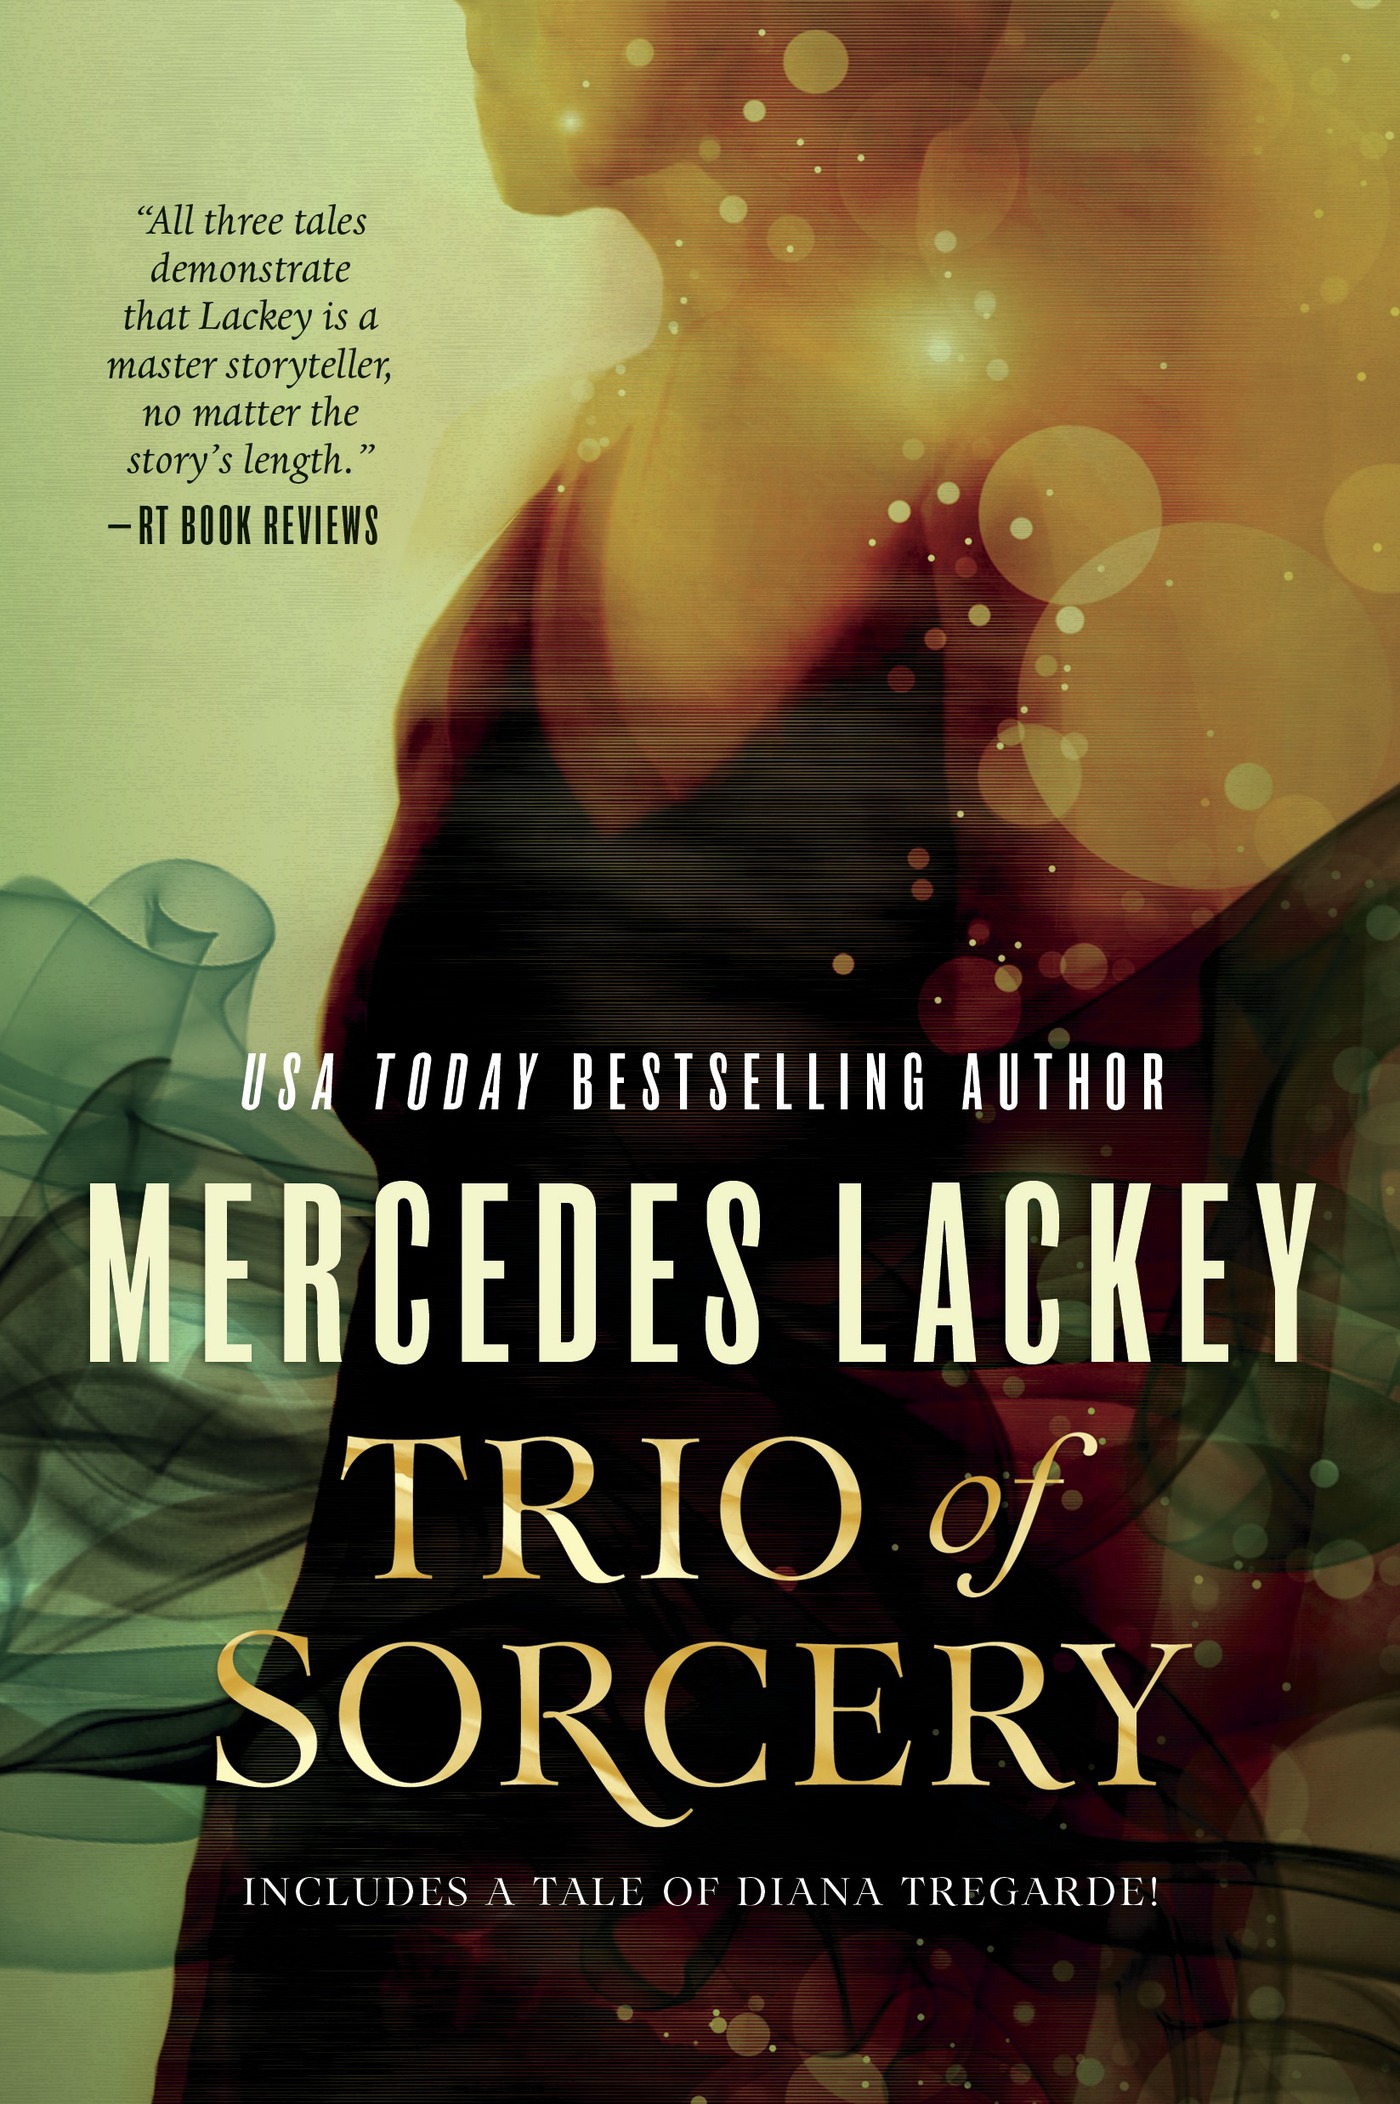 Trio of Sorcery : Arcanum 101, Drums, and Ghost in the Machine by Mercedes Lackey